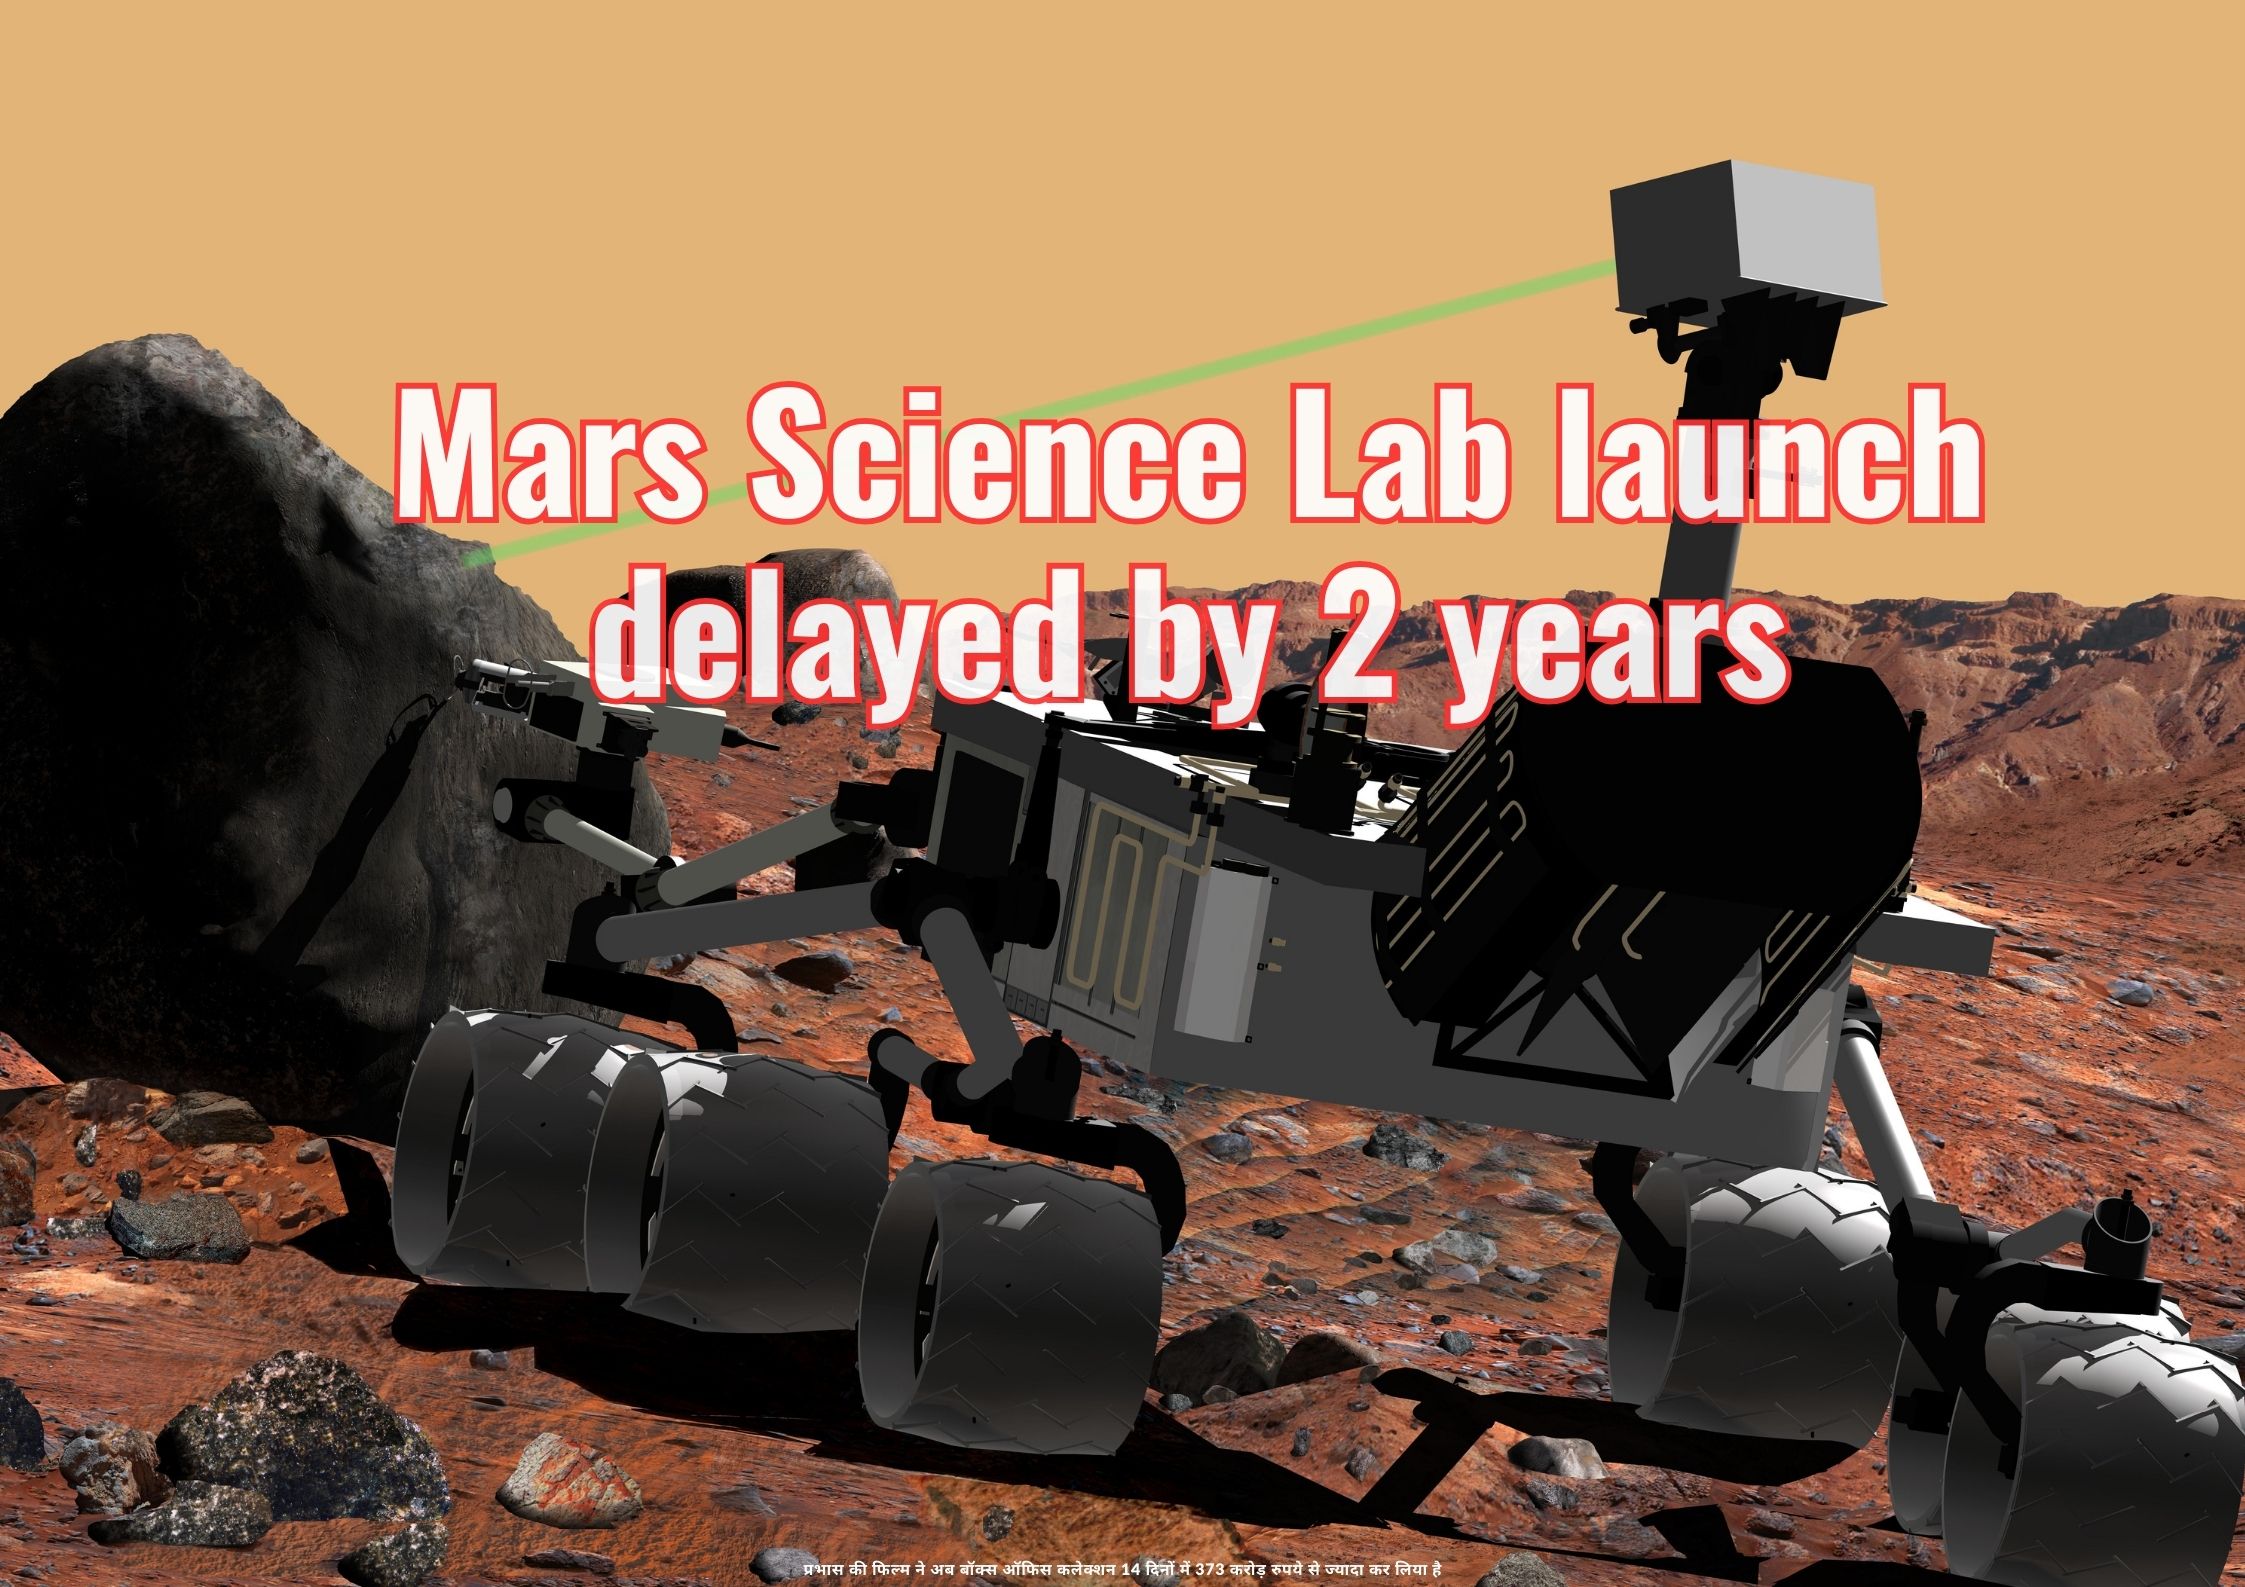 Mars Science Lab launch delayed by 2 years